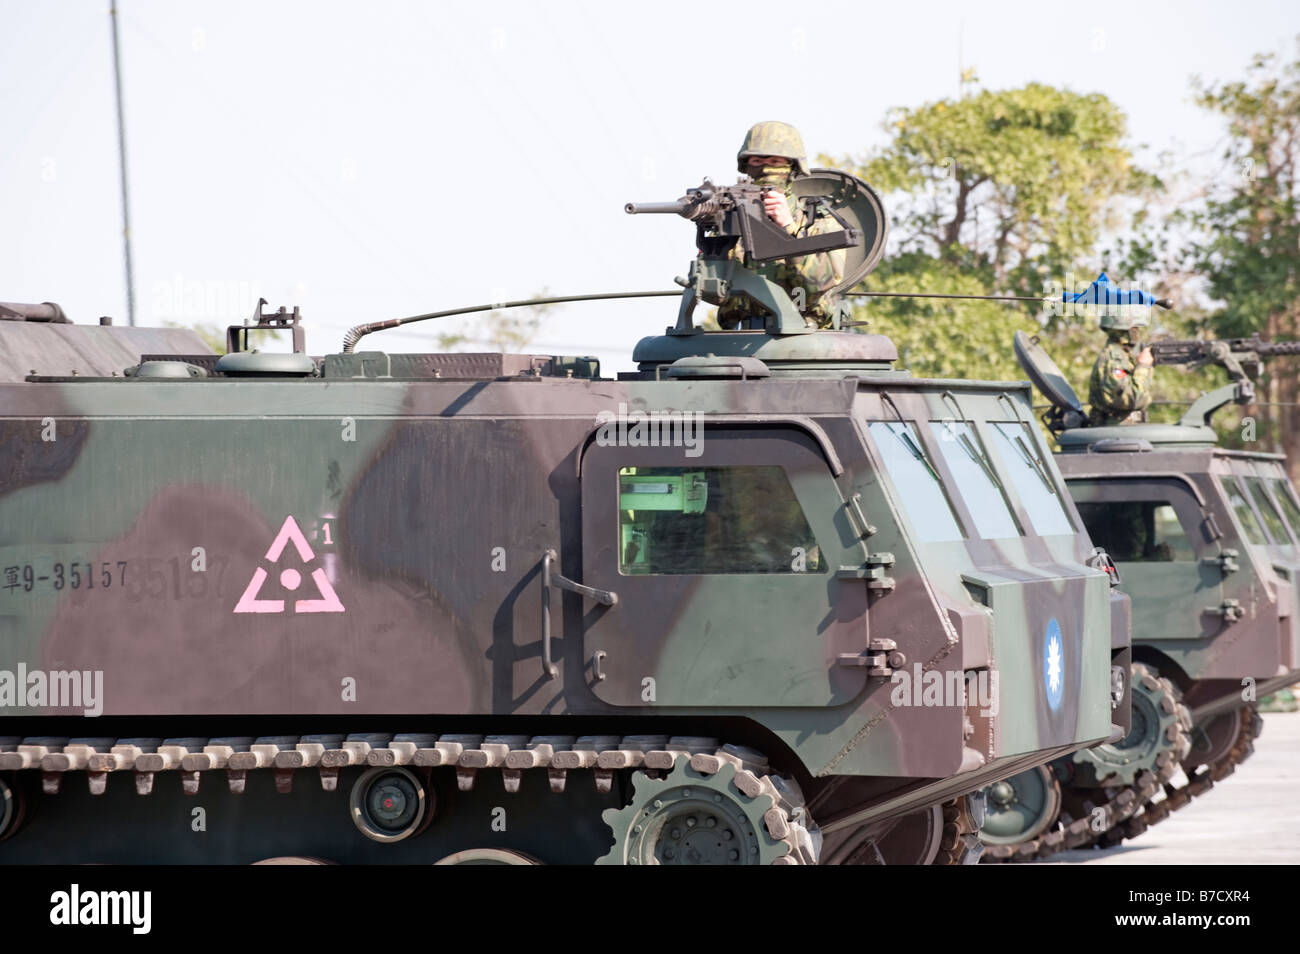 Close up Of A Taiwanese Soldier Firing A M2 Machine Gun On A CM-24 Armored Carrier During War Games, Taichung, Taiwan Stock Photo